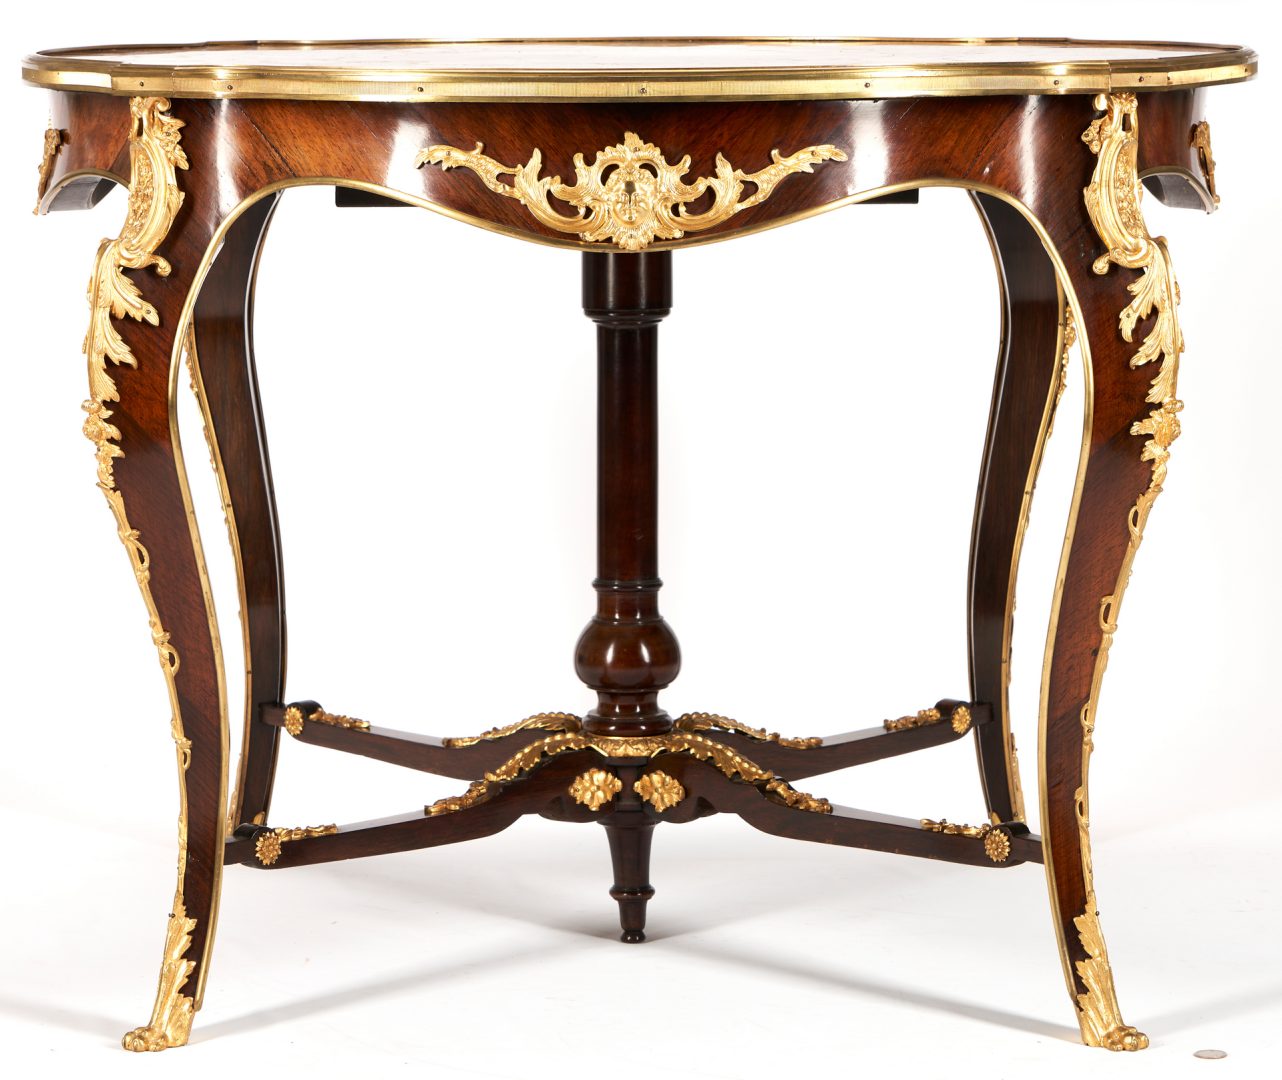 Lot 168: Louis XV Ormolu Mounted Center Table with Variegated Marble Top